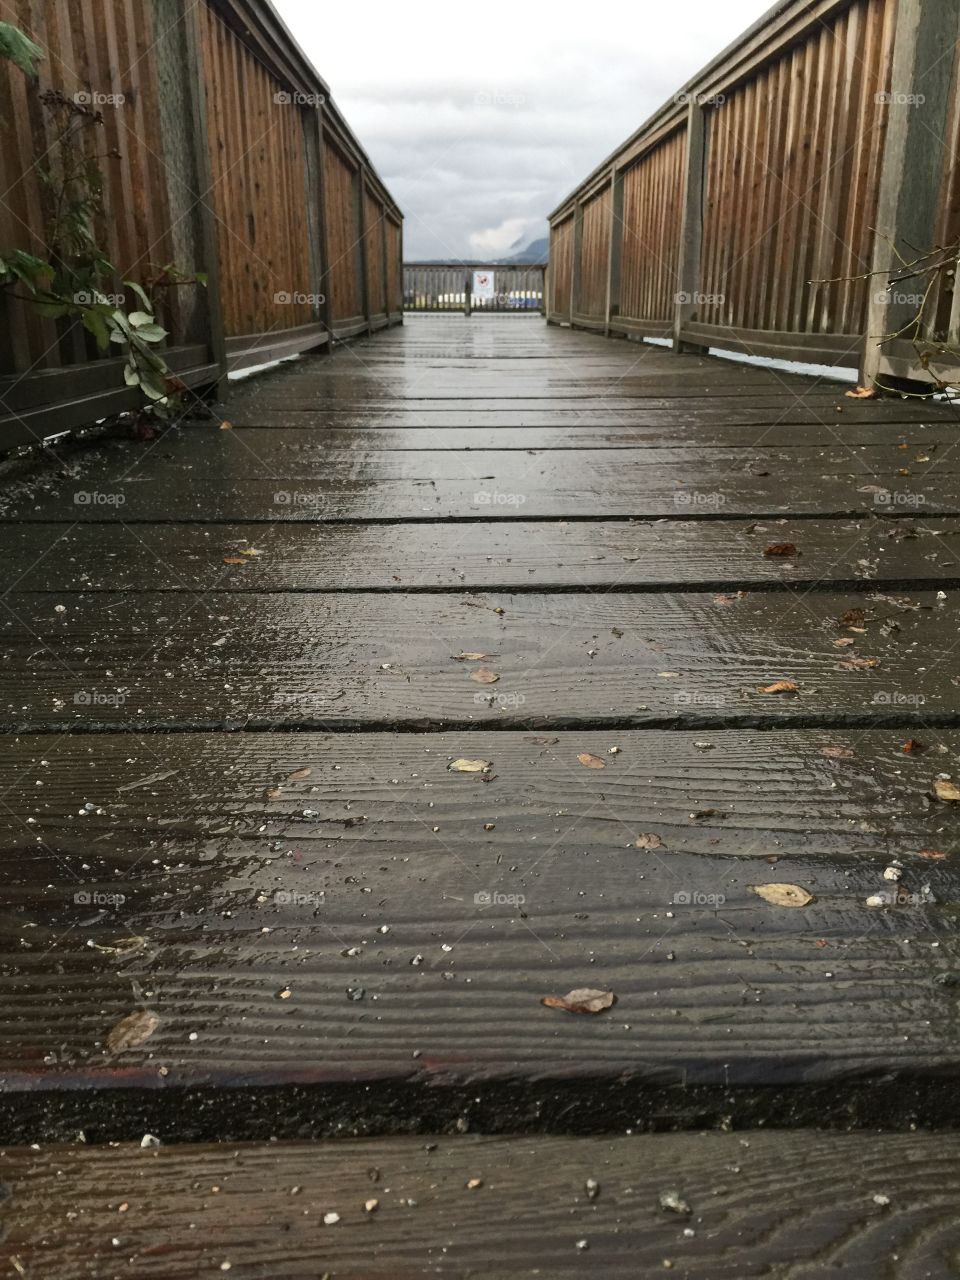 An ant’s perspective of a wet pier after a rain storm